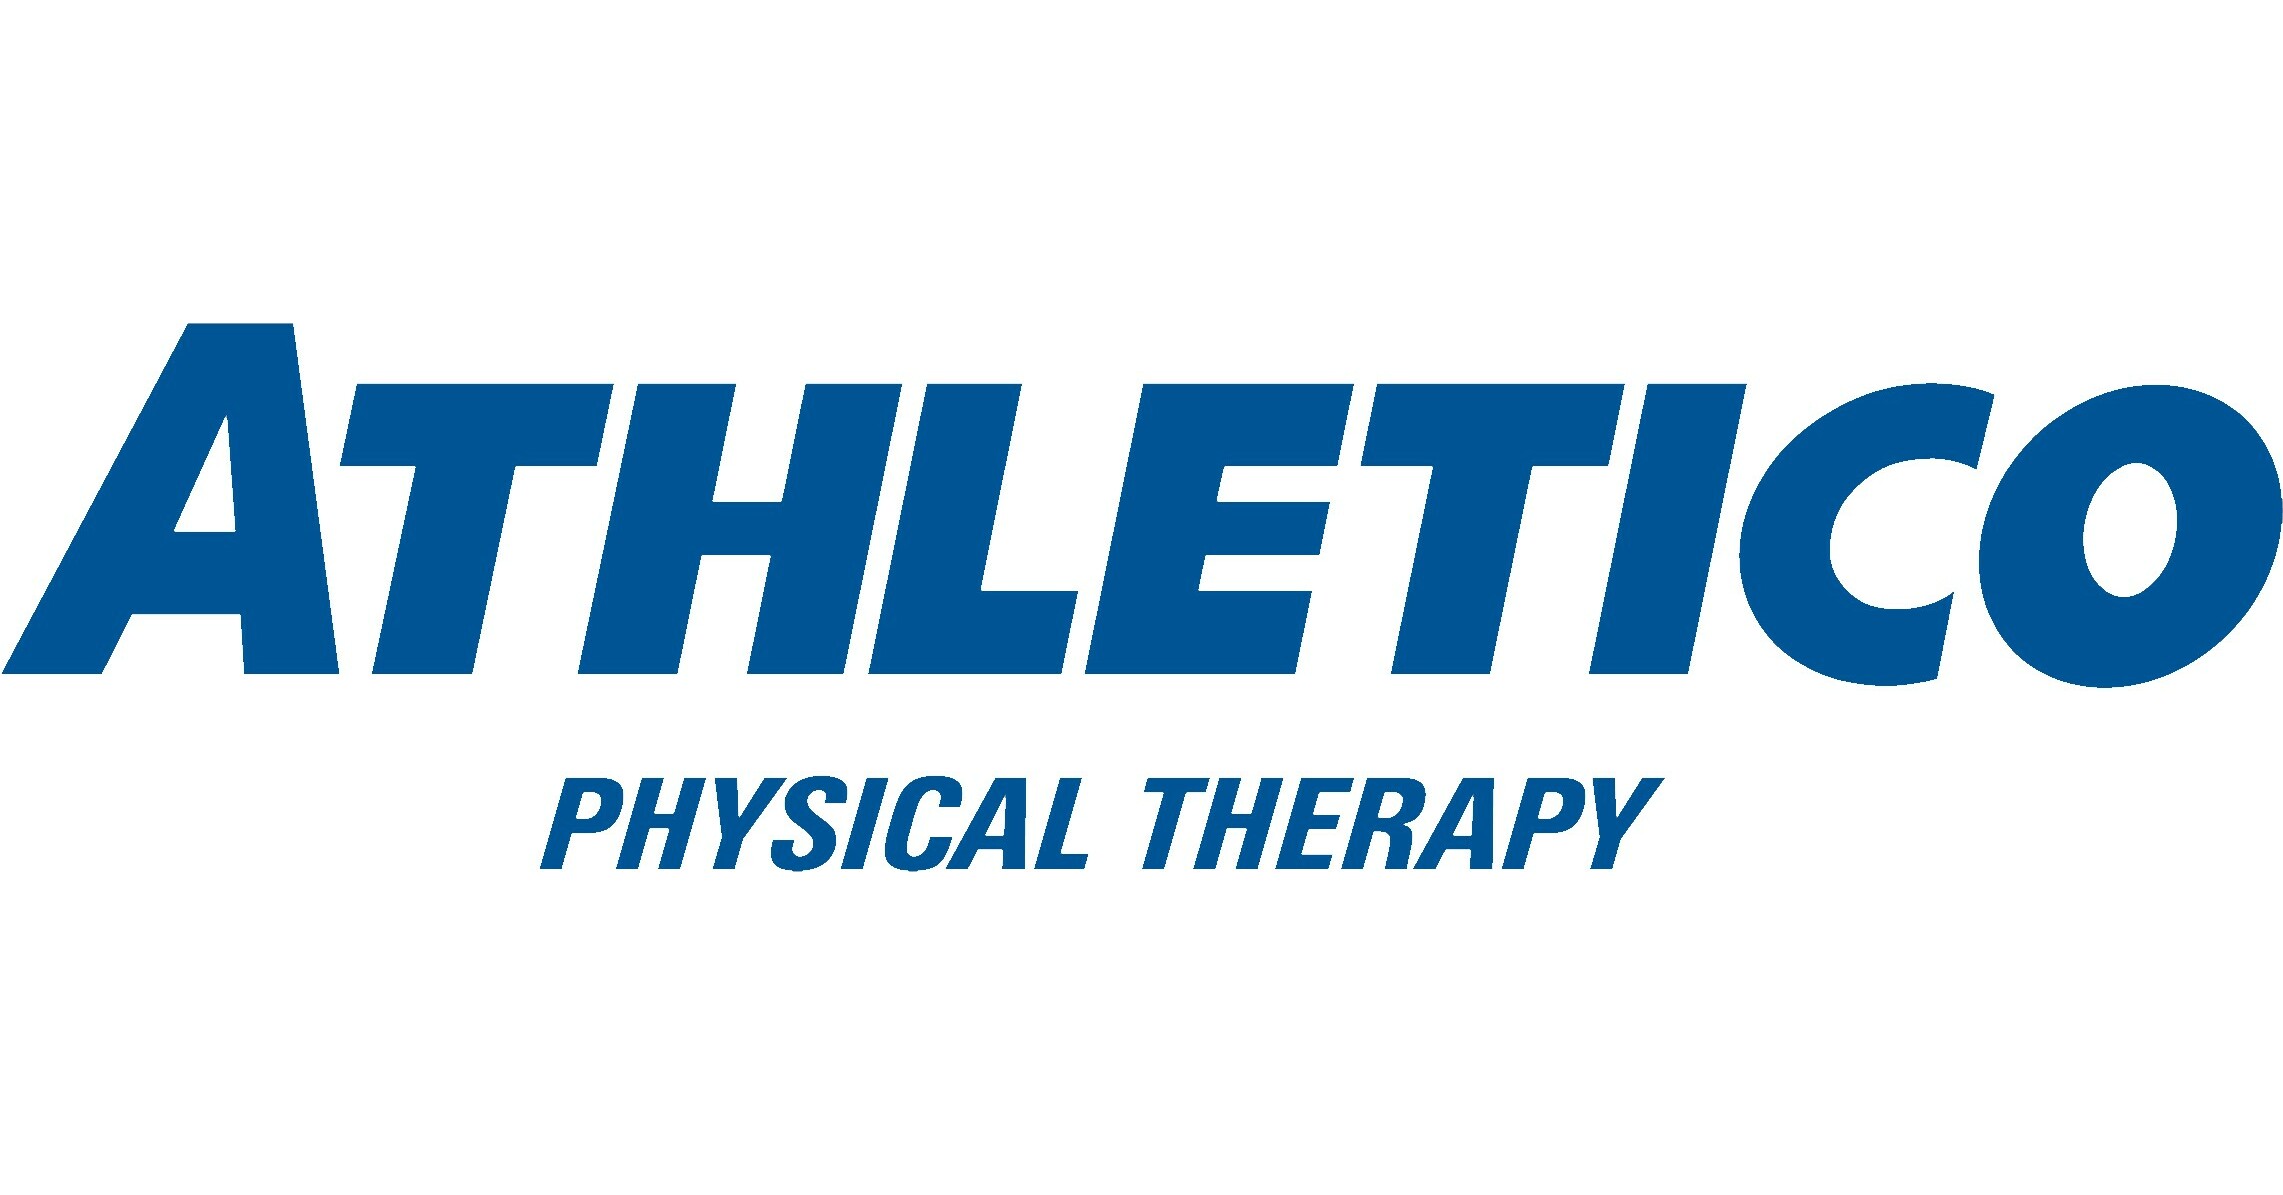 Athletico Physical Therapy Clinician Care Recognized as ‘Exceptional’ by Centers for Medicare and Medicaid Services (CMS)